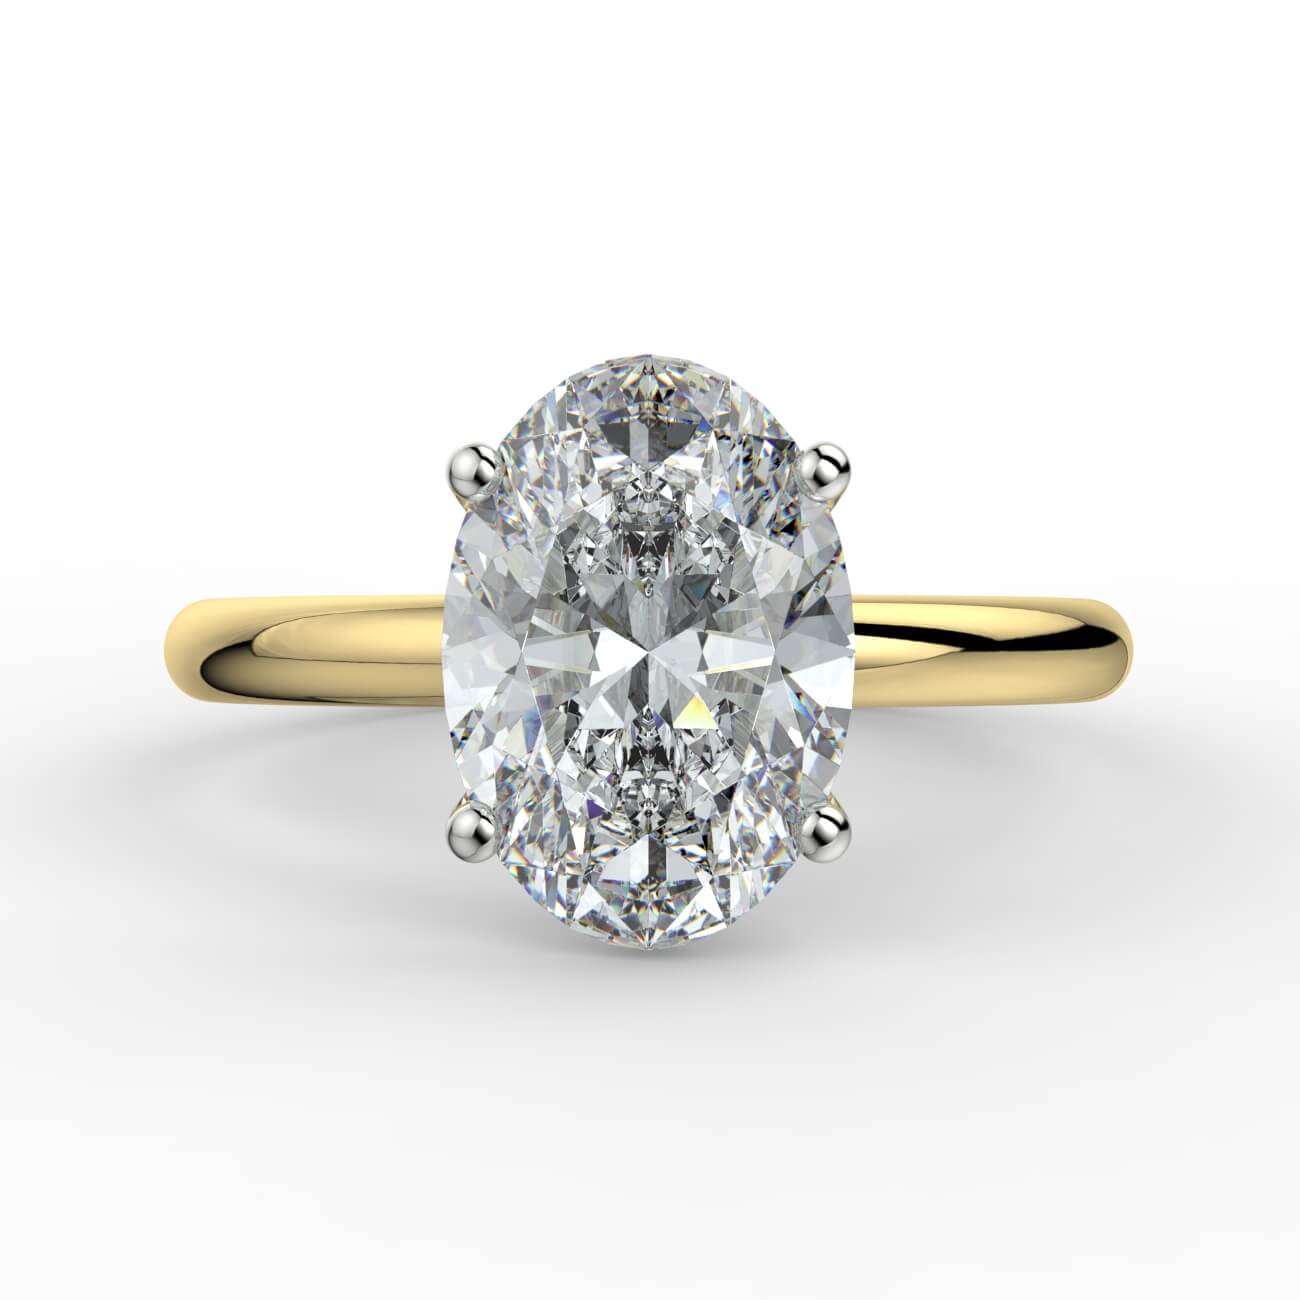 Solitaire oval diamond engagement ring in white and yellow gold – Australian Diamond Network